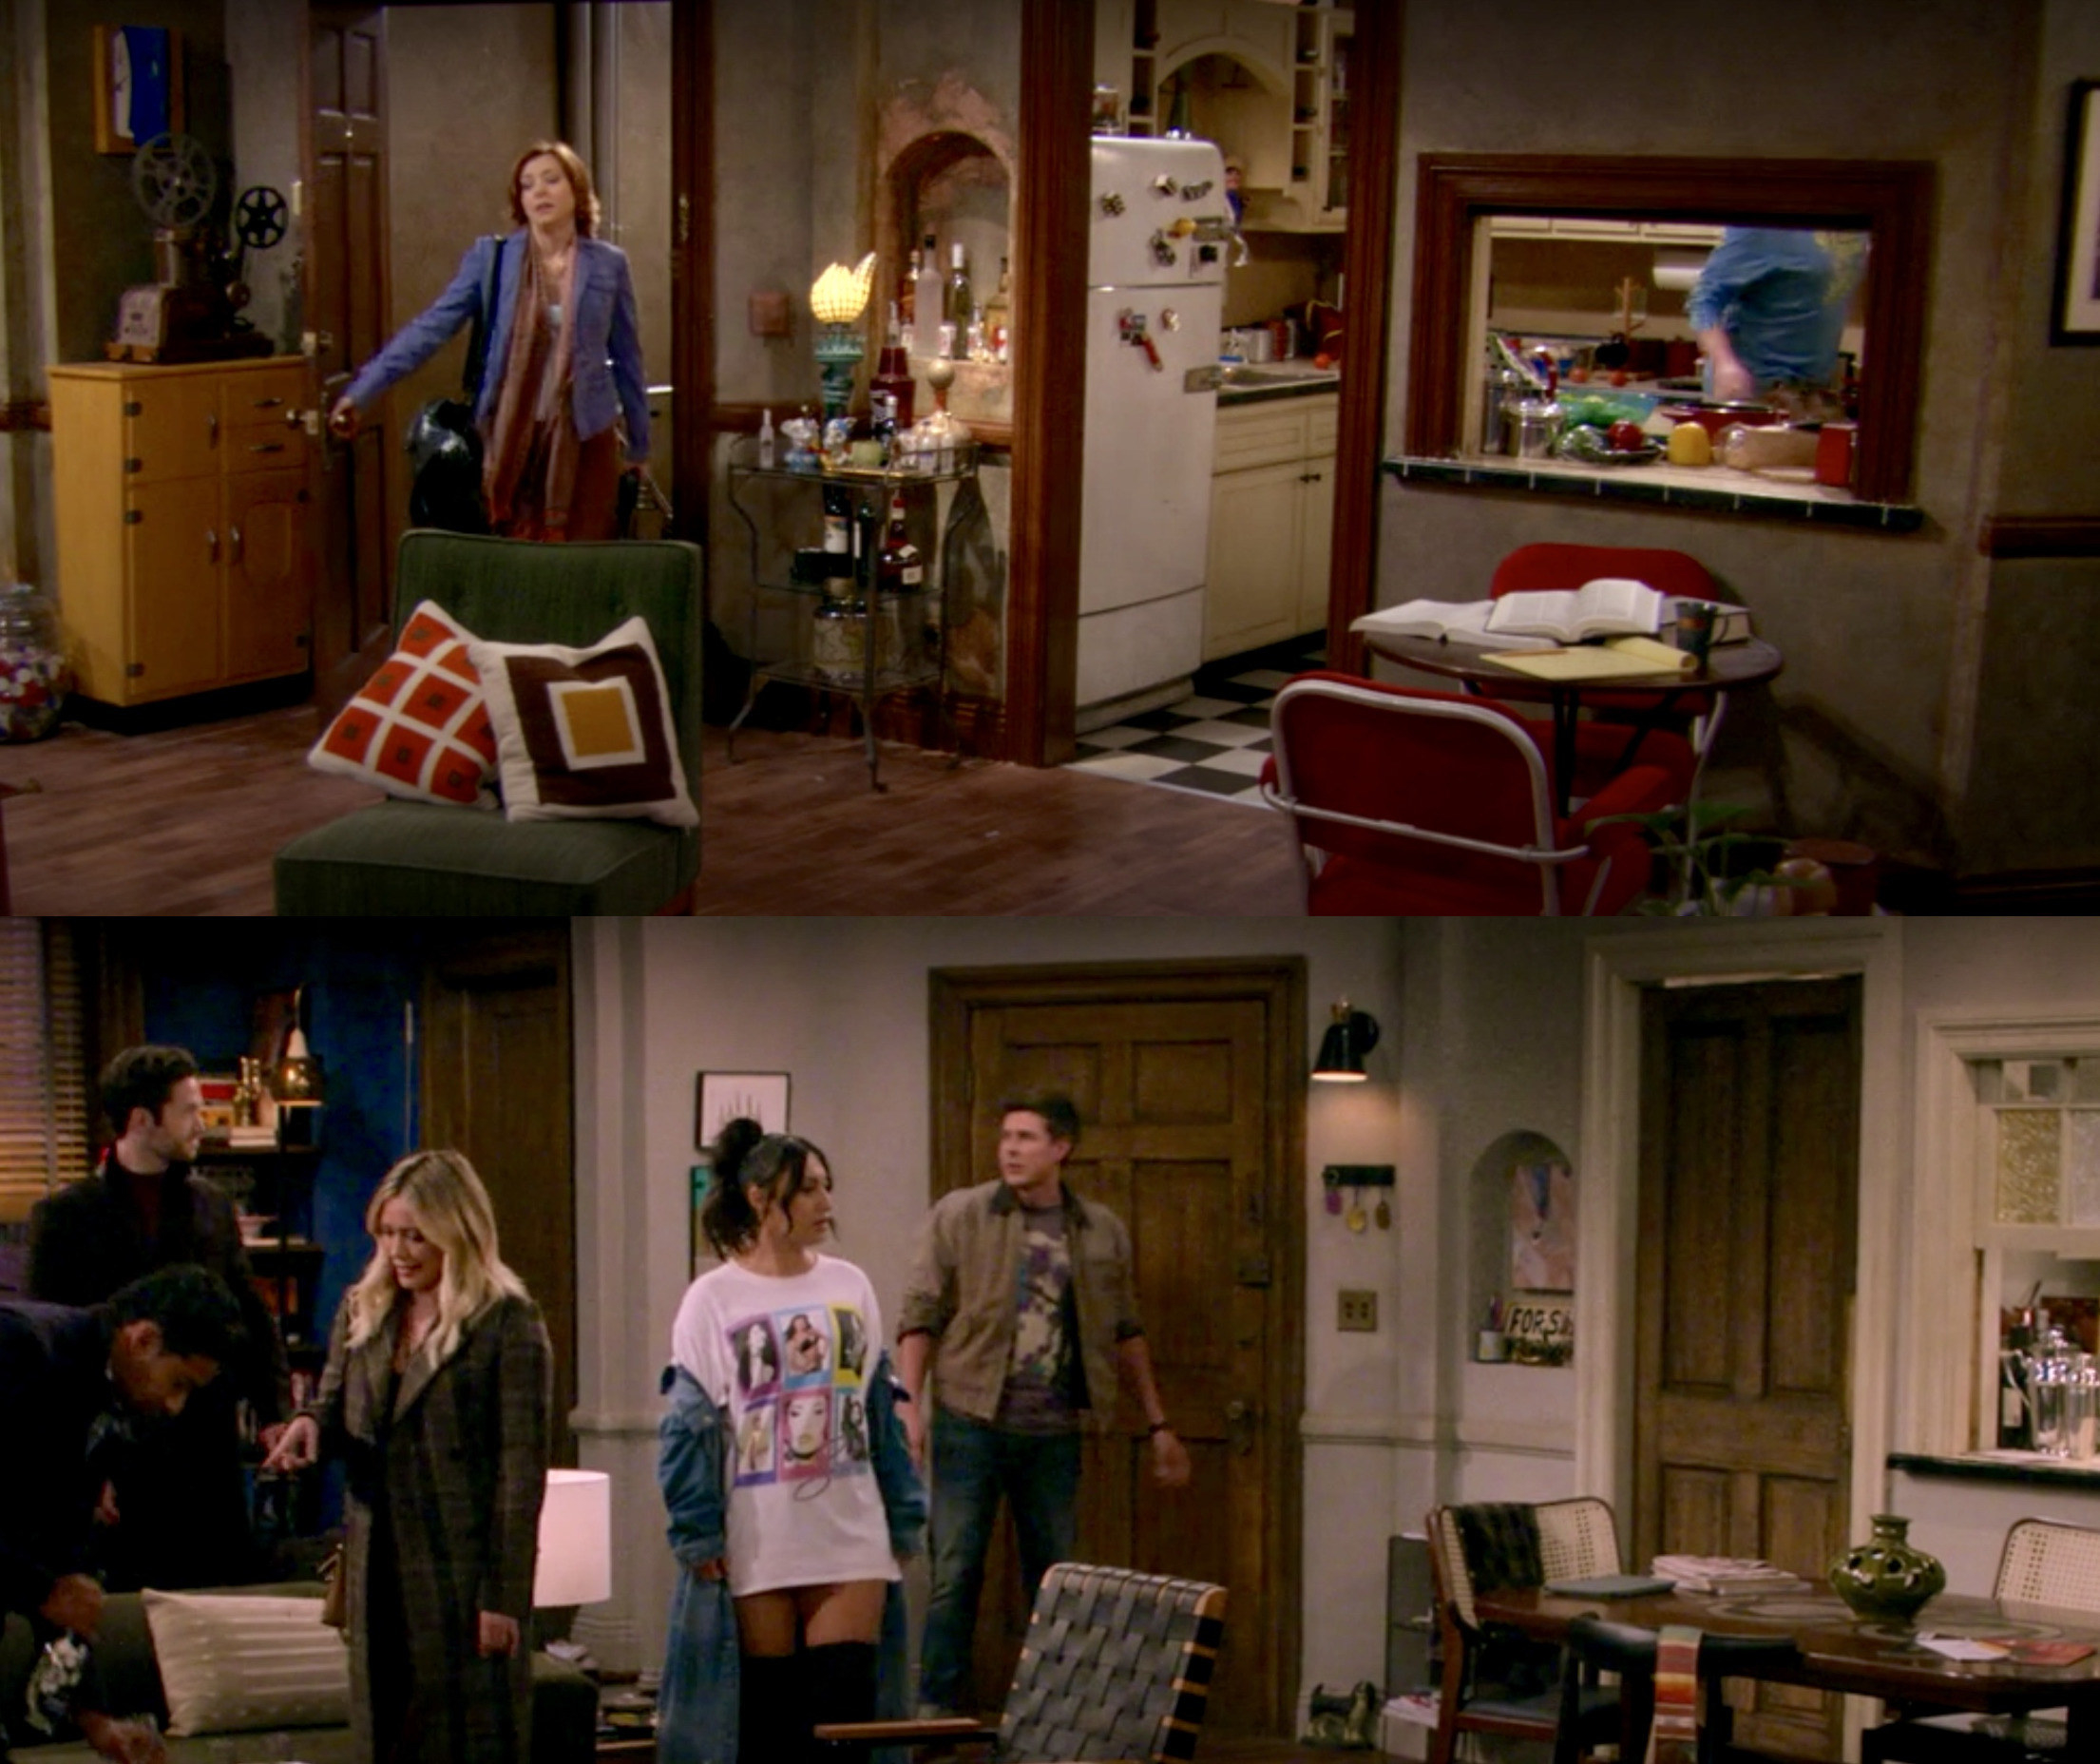 The HIMYM apartment (top) and the HIMYF apartment (bottom) turn out to be the same one.